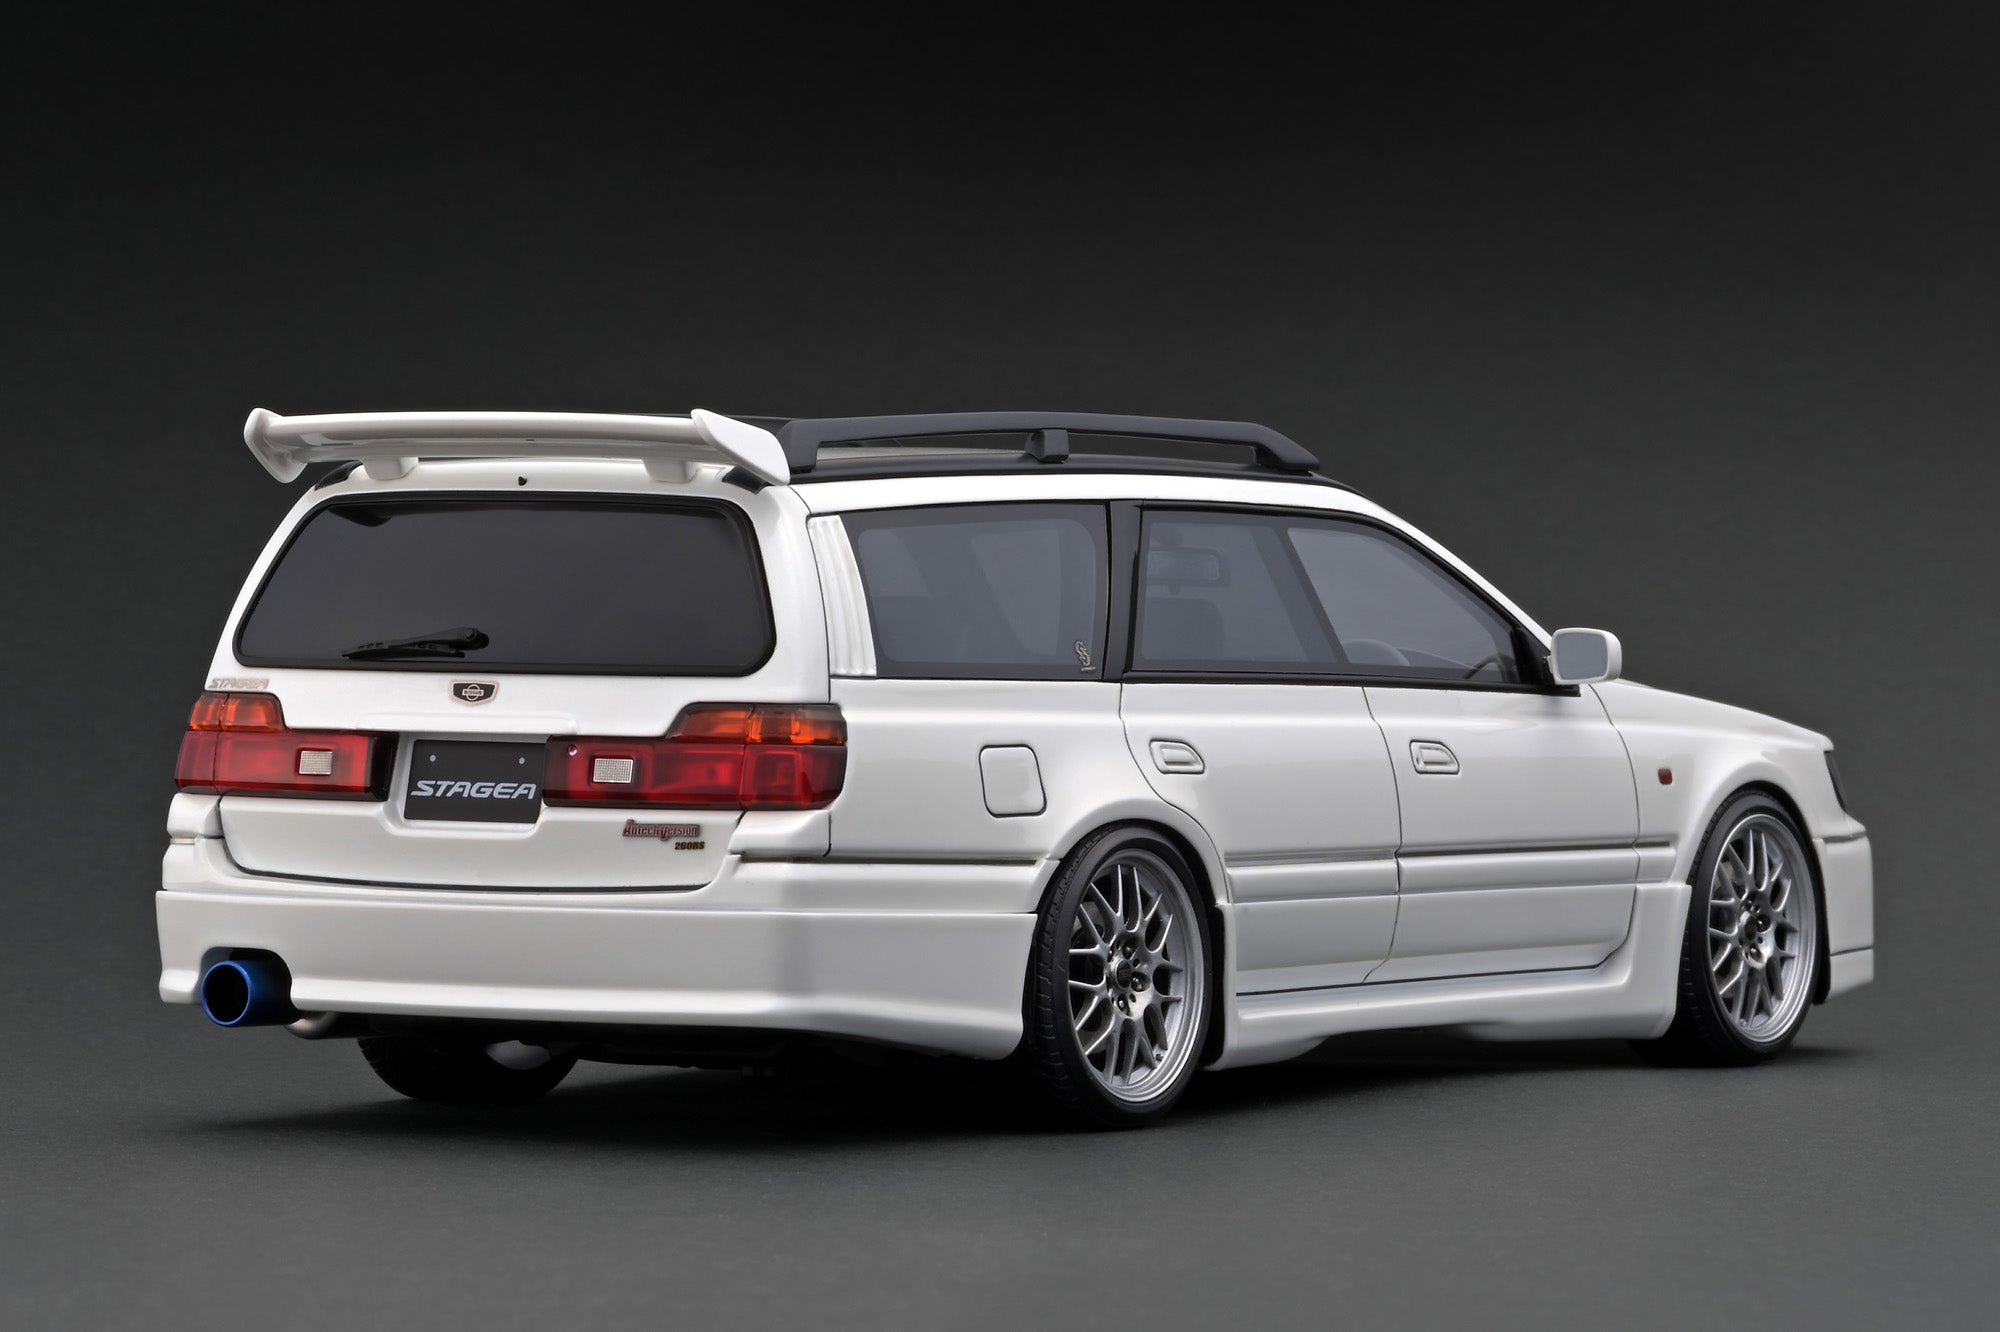 IG2885 Nissan STAGEA 260RS (WGNC34) Pearl White – ignition model